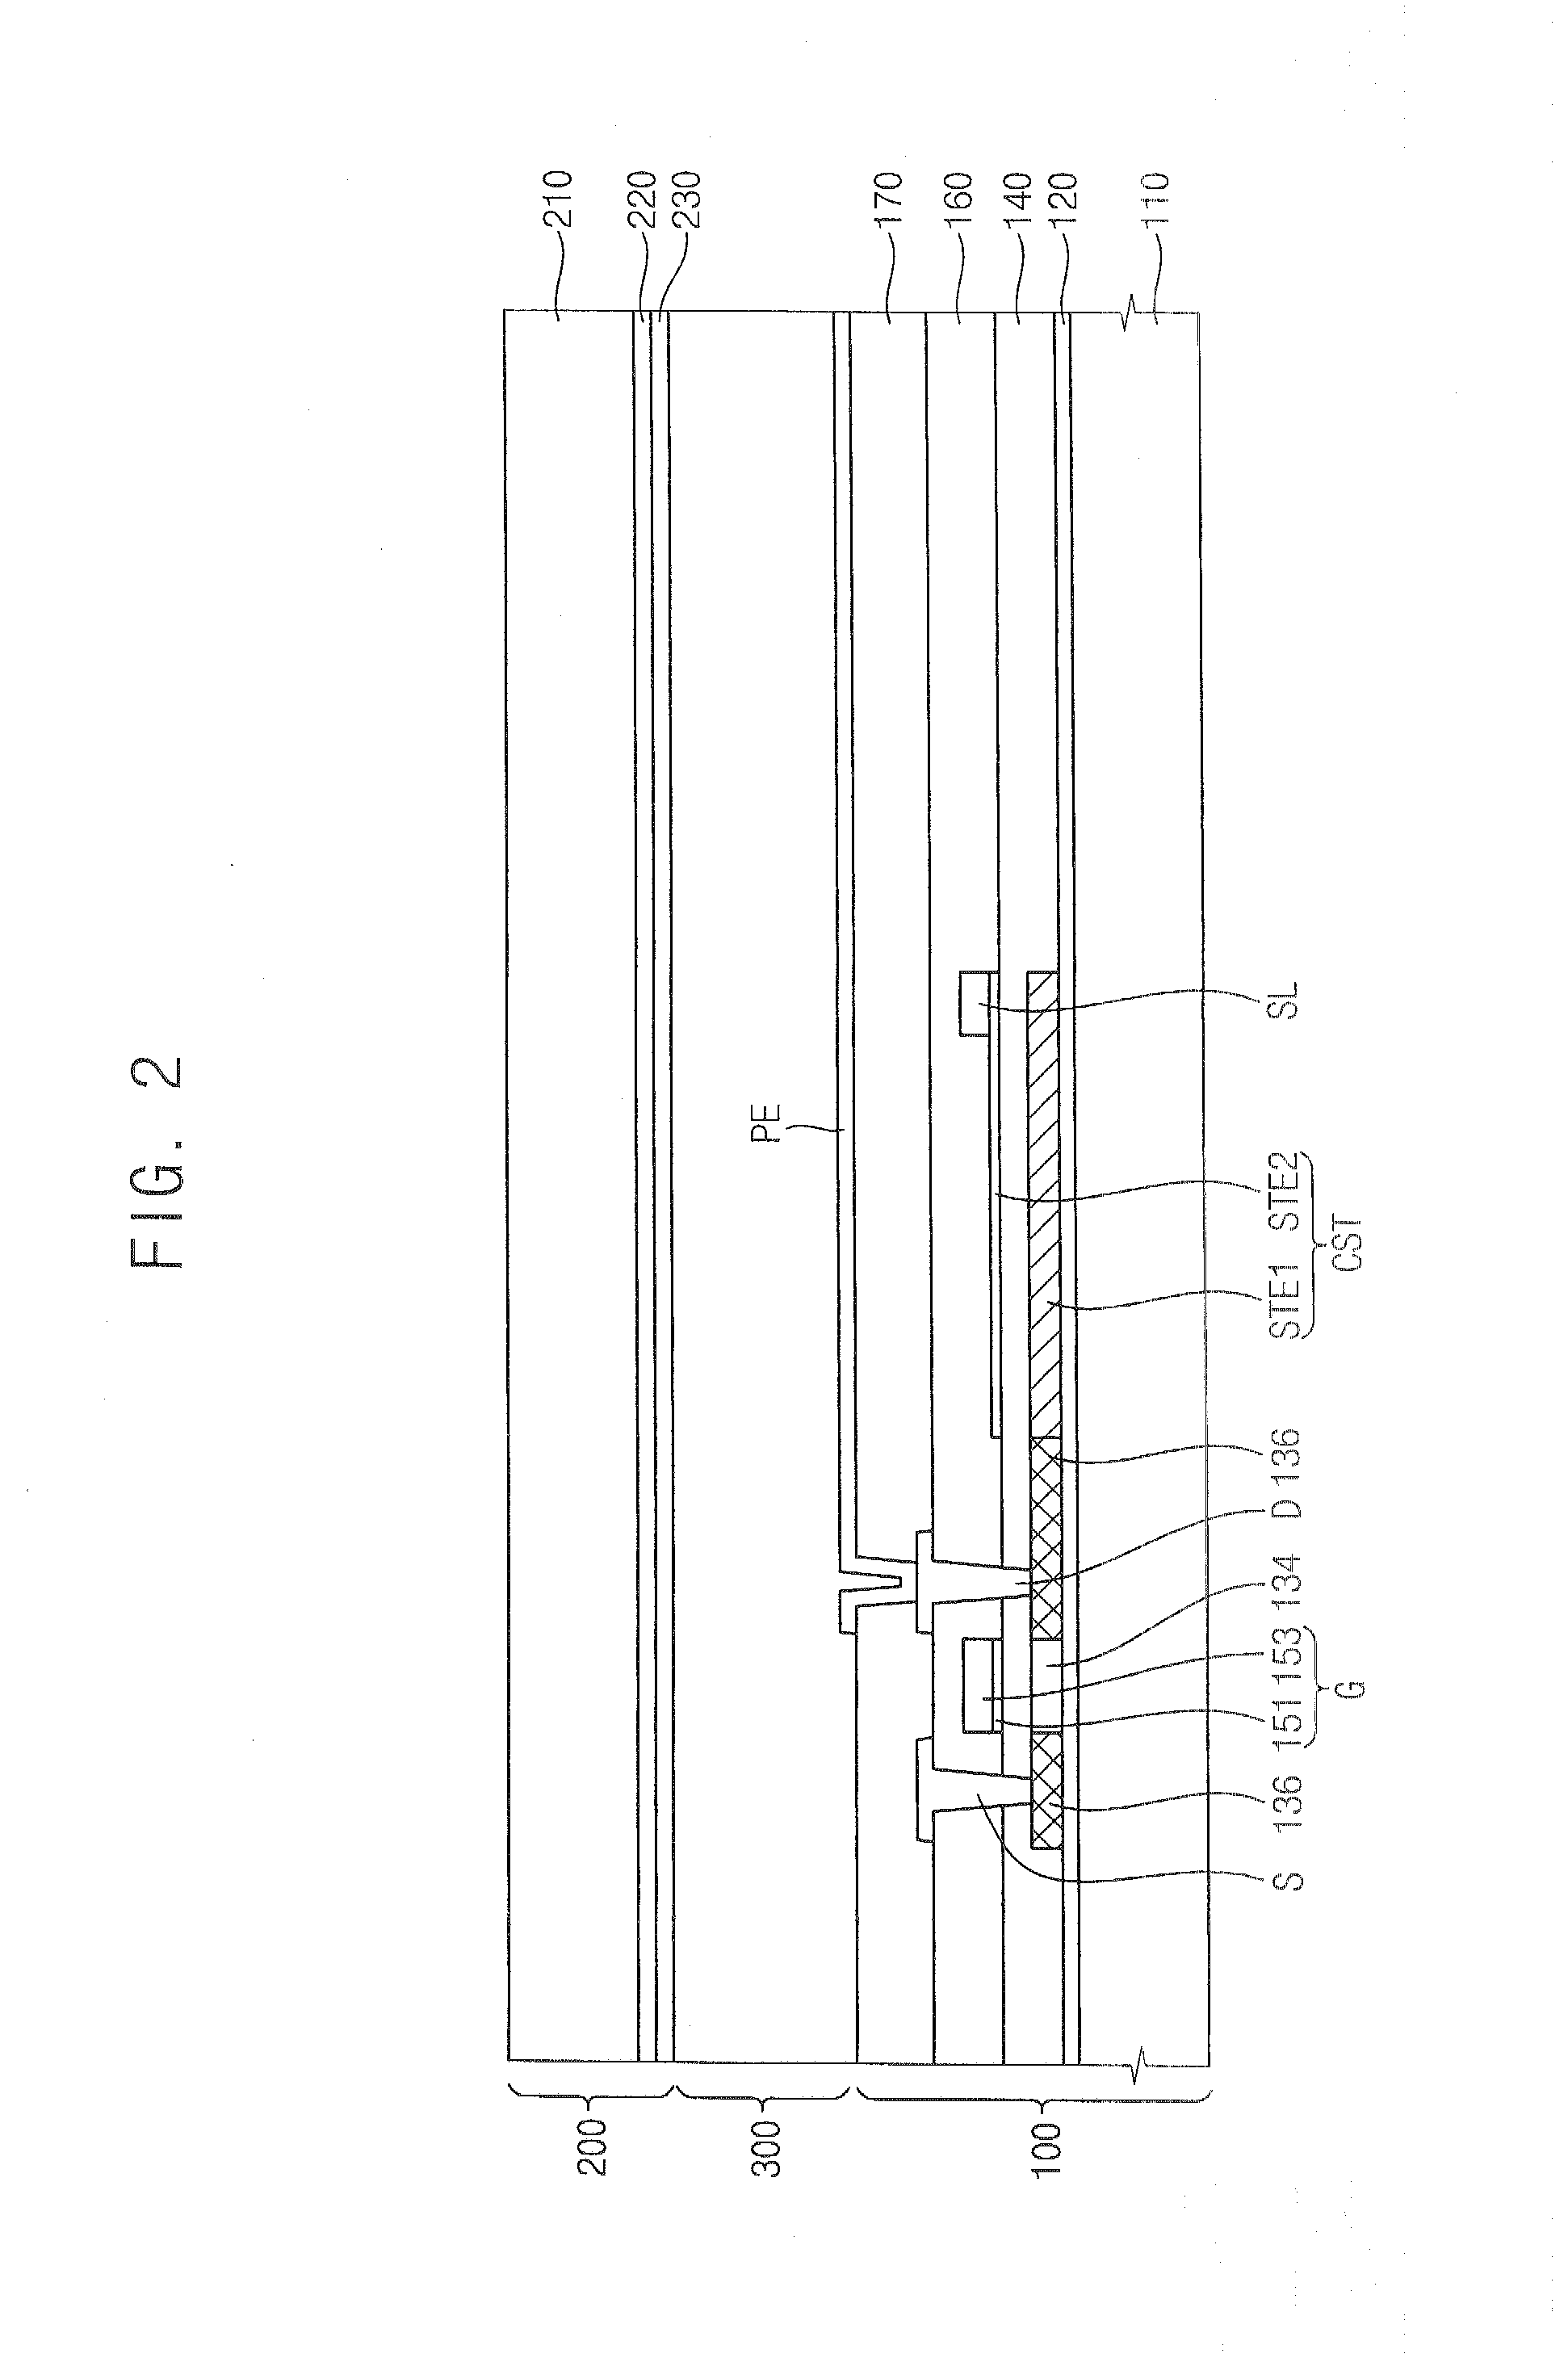 Display substrate, method of manufacturing the same and display apparatus having the same